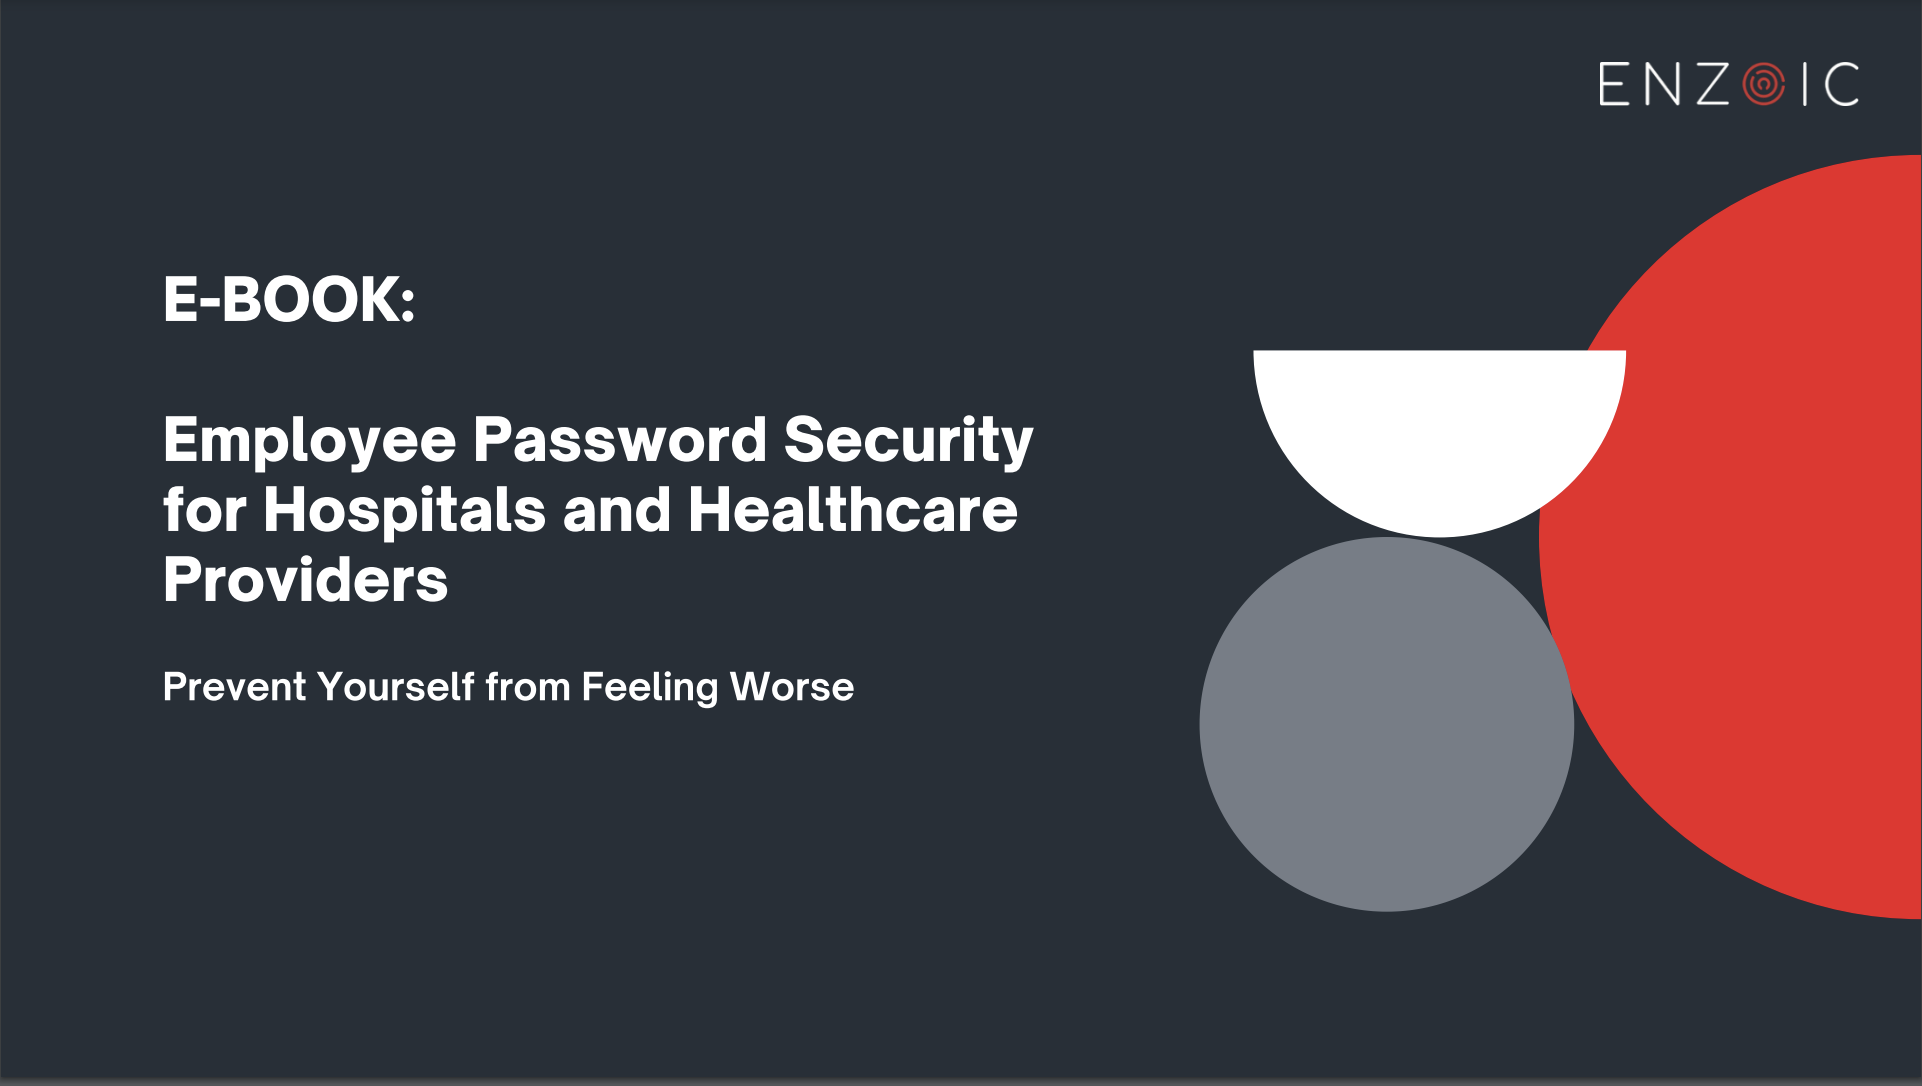 Employee Password Security for Hospitals and Healthcare Providers